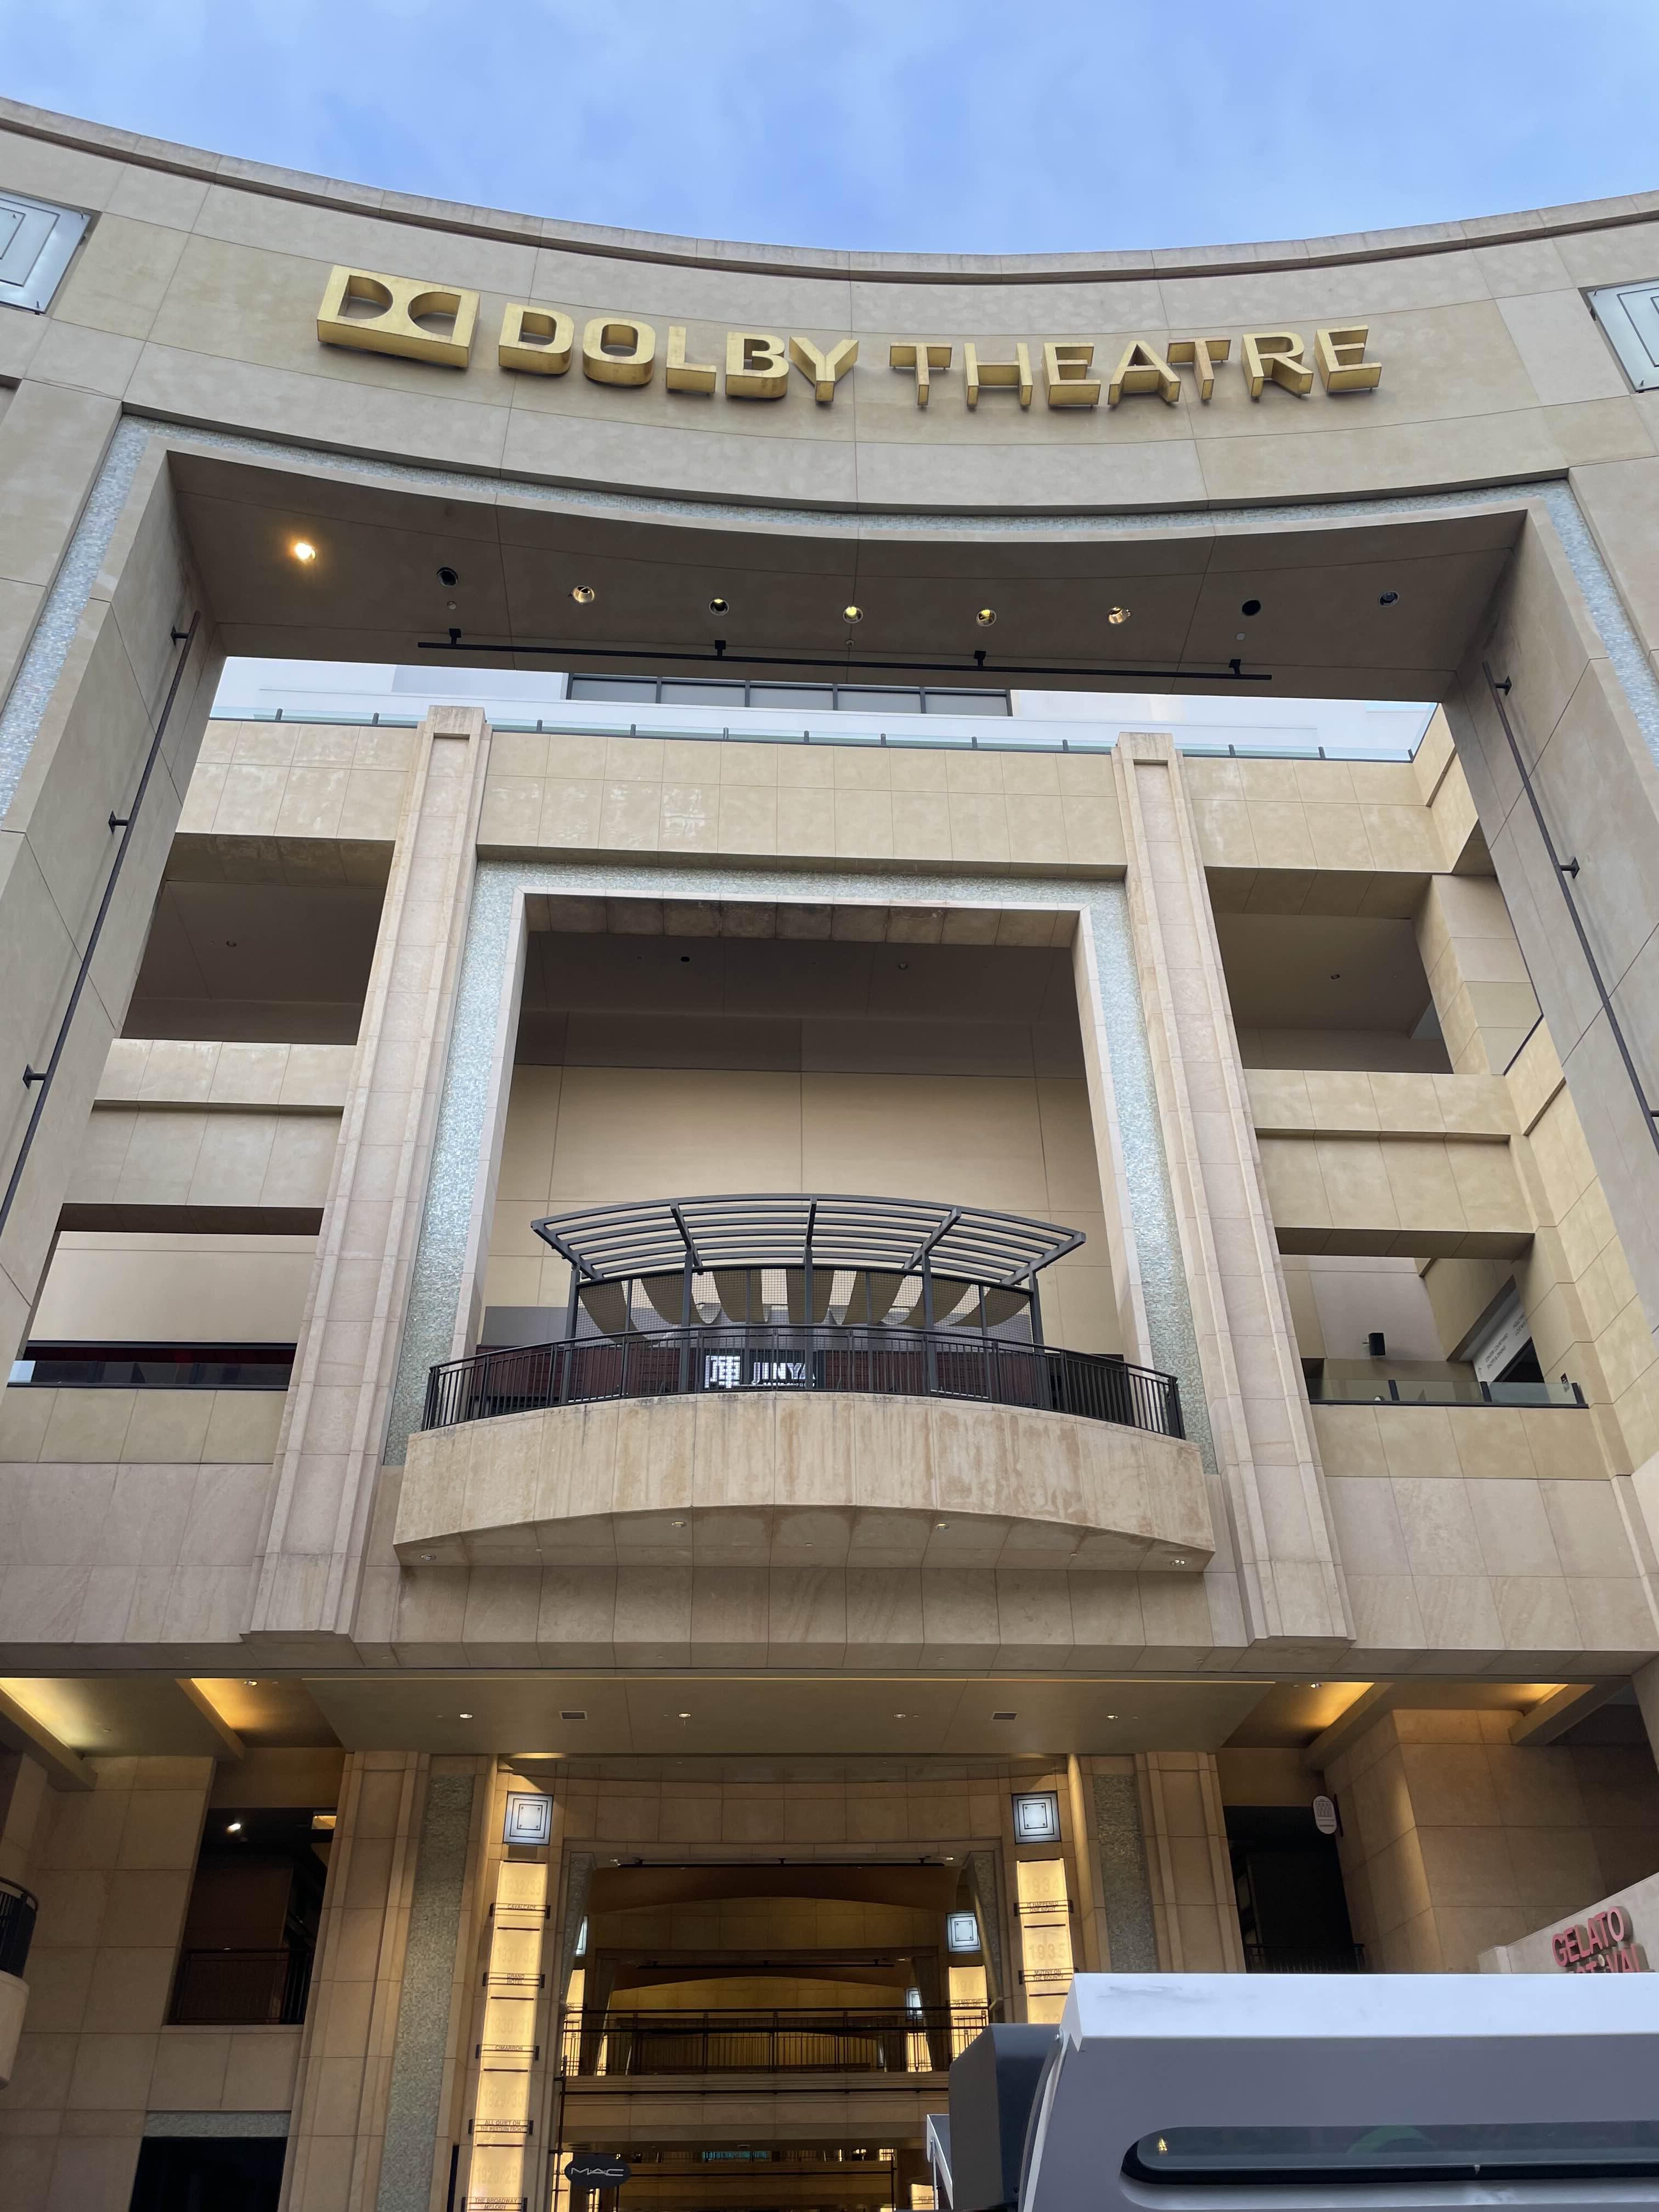 Dolby theatre